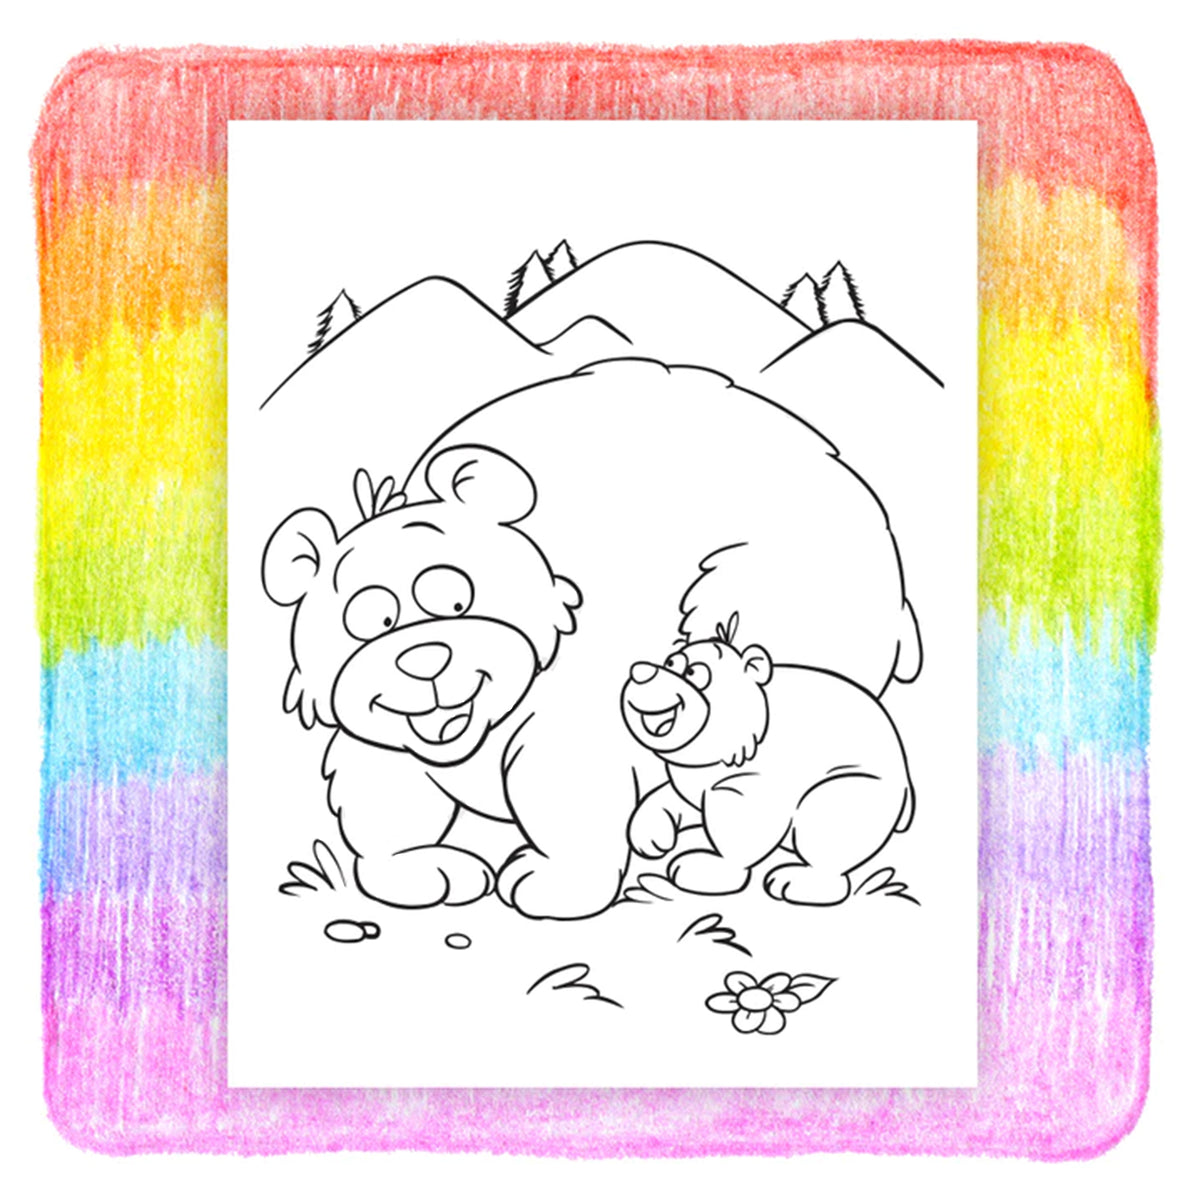 Fun Time Coloring and Activity Book In Bulk